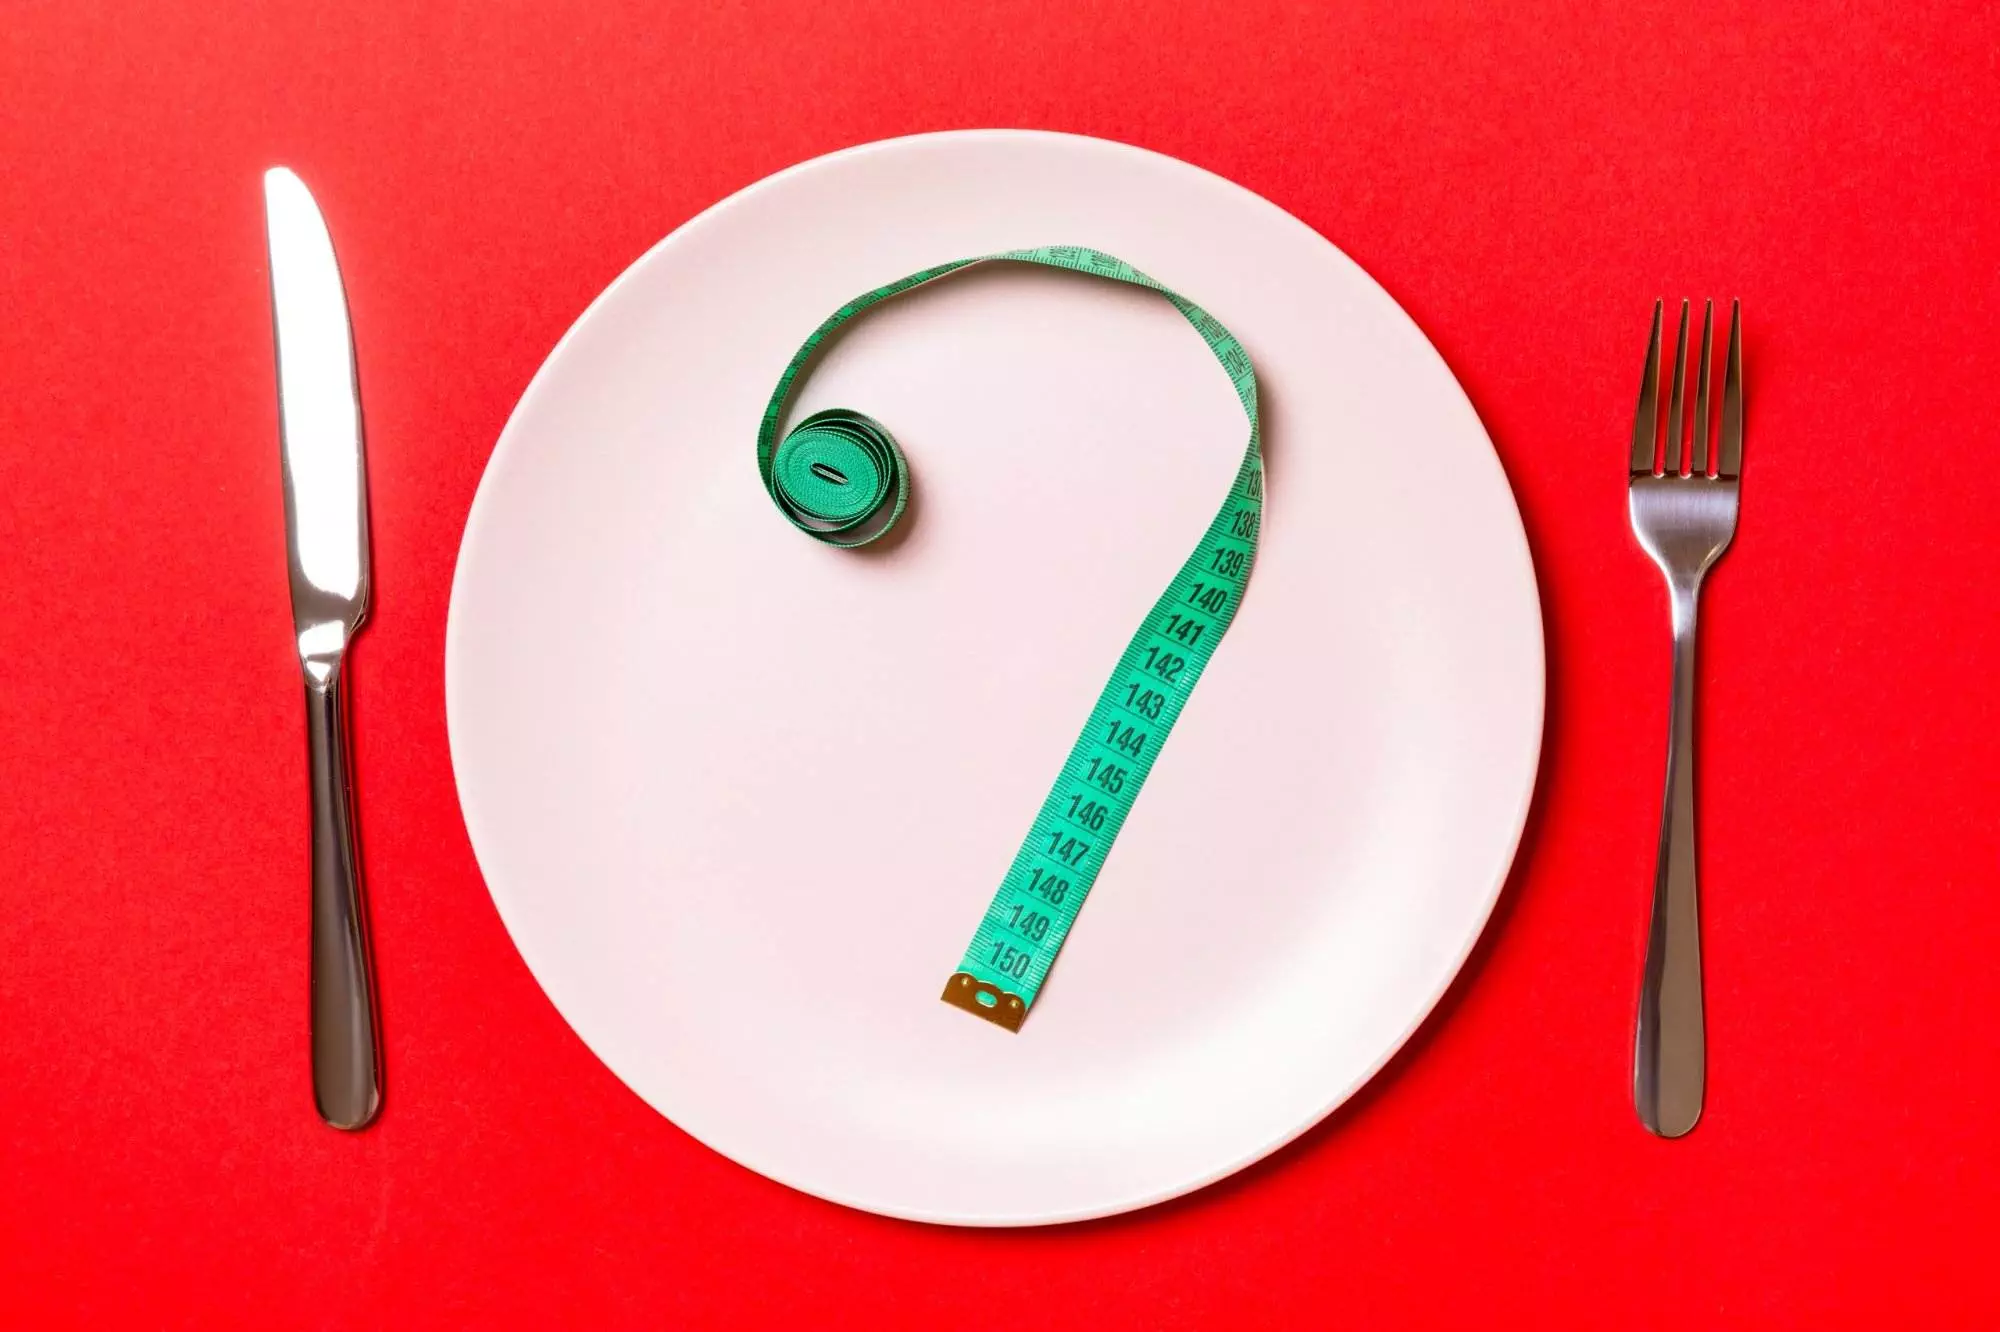 Measuring tape on plate, diet concept, red background.